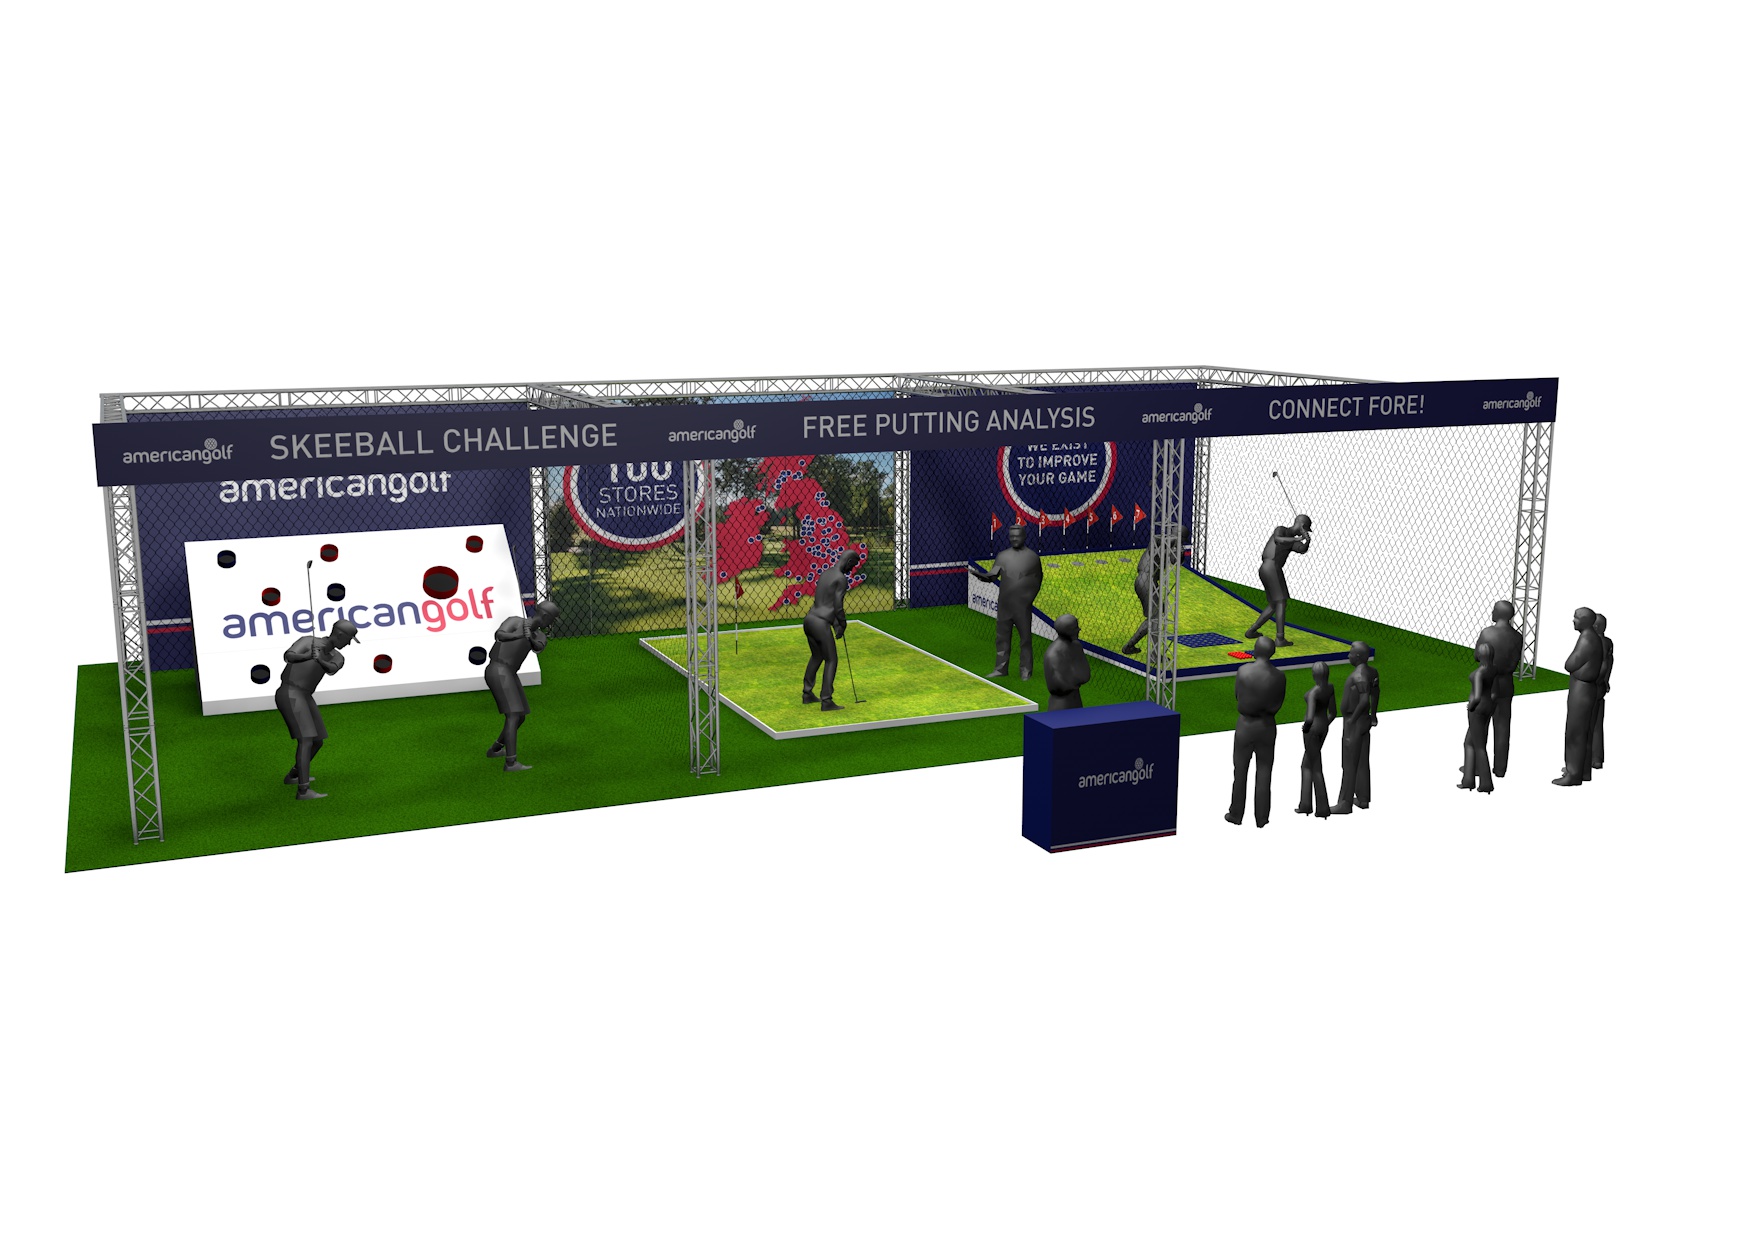 American Golf partners with European Tour to deliver Fan Experience